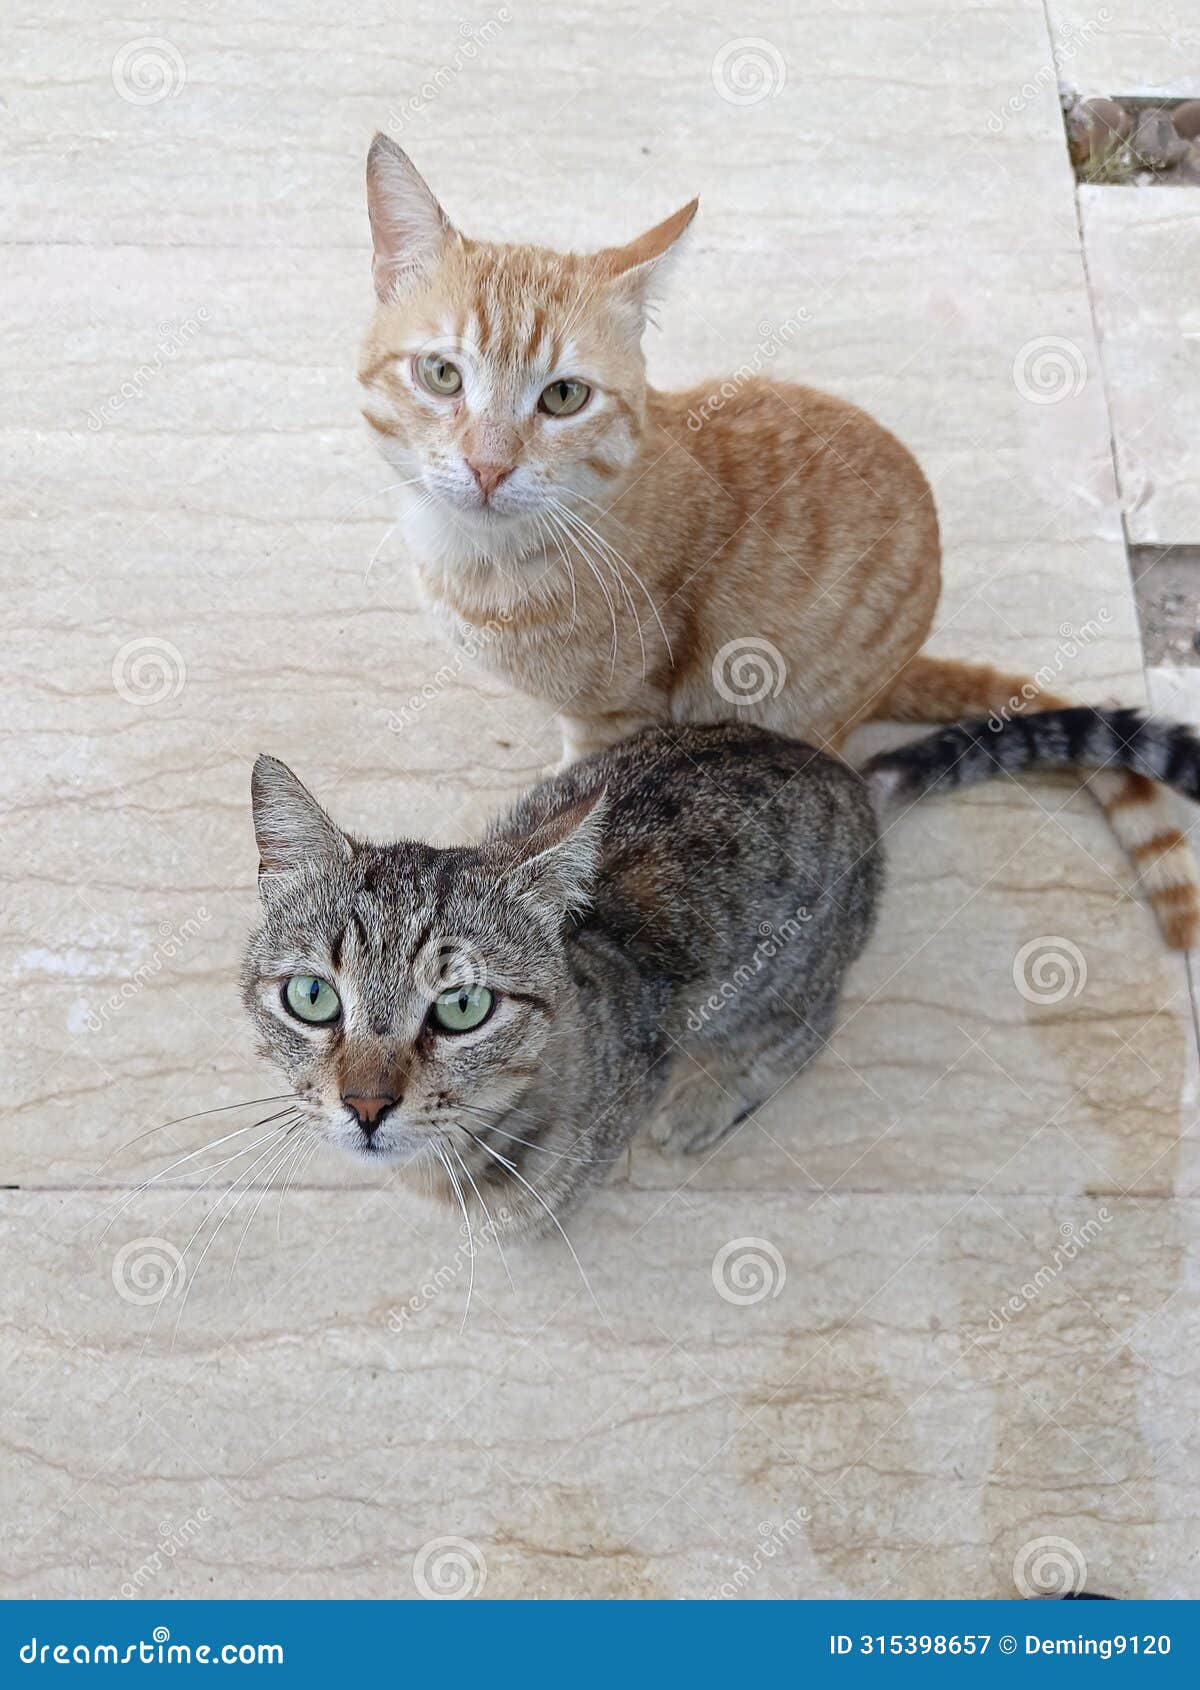 two tabby cats visiting